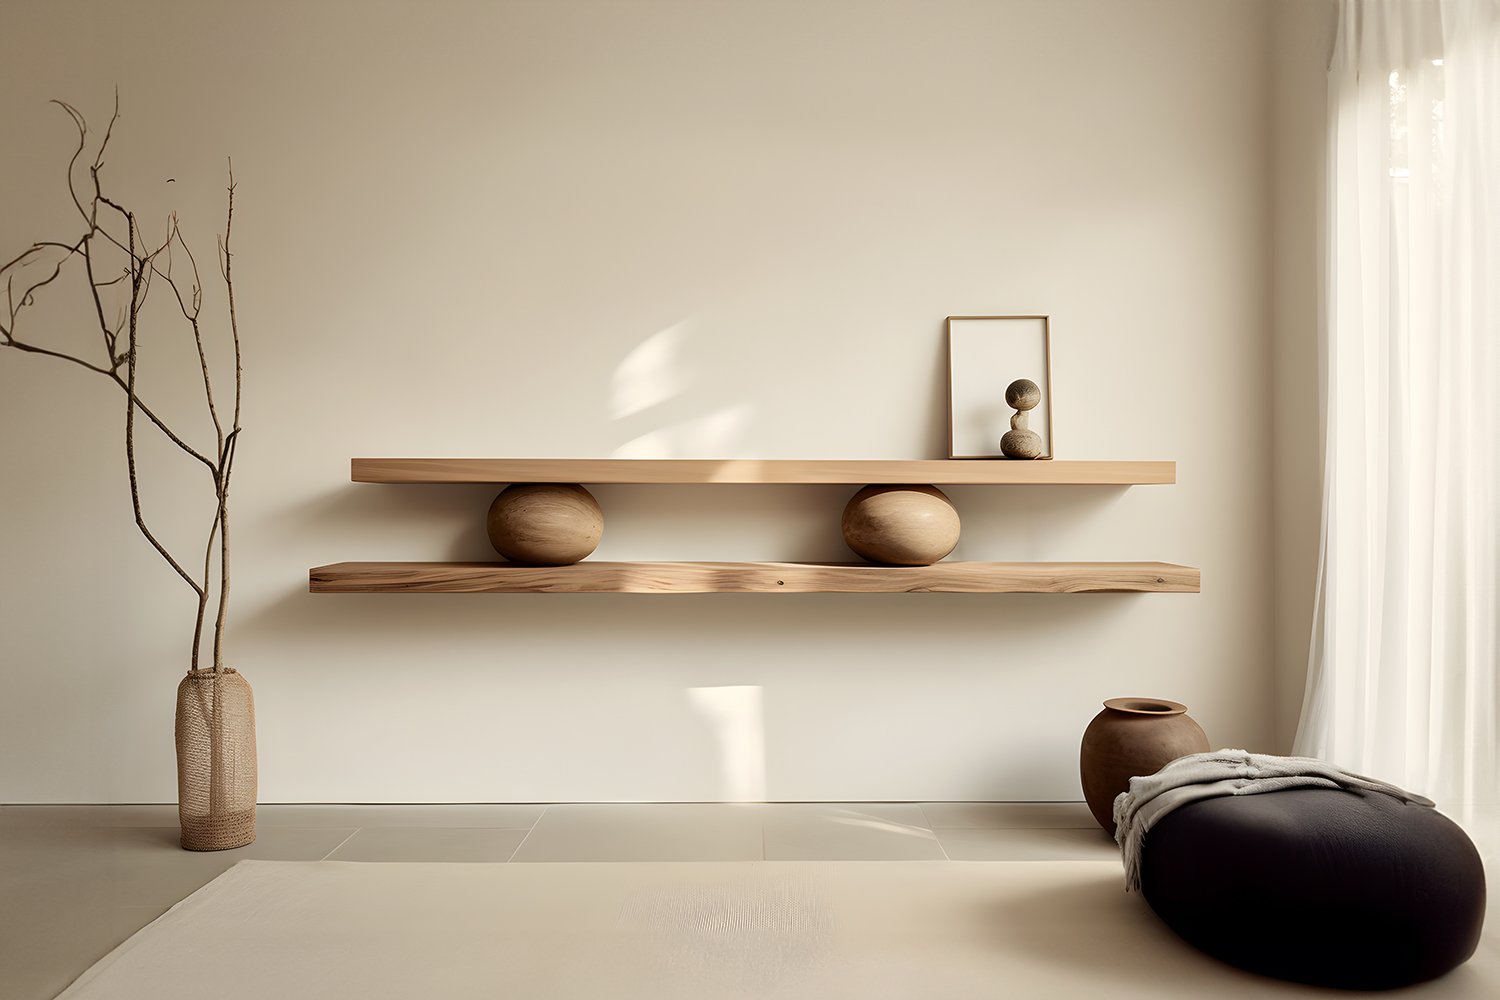 Set of Two Large Floating Shelves with Two Sculptural Wooden Pebble Accents in the Middle, Sereno by Joel Escalona — 4.jpg